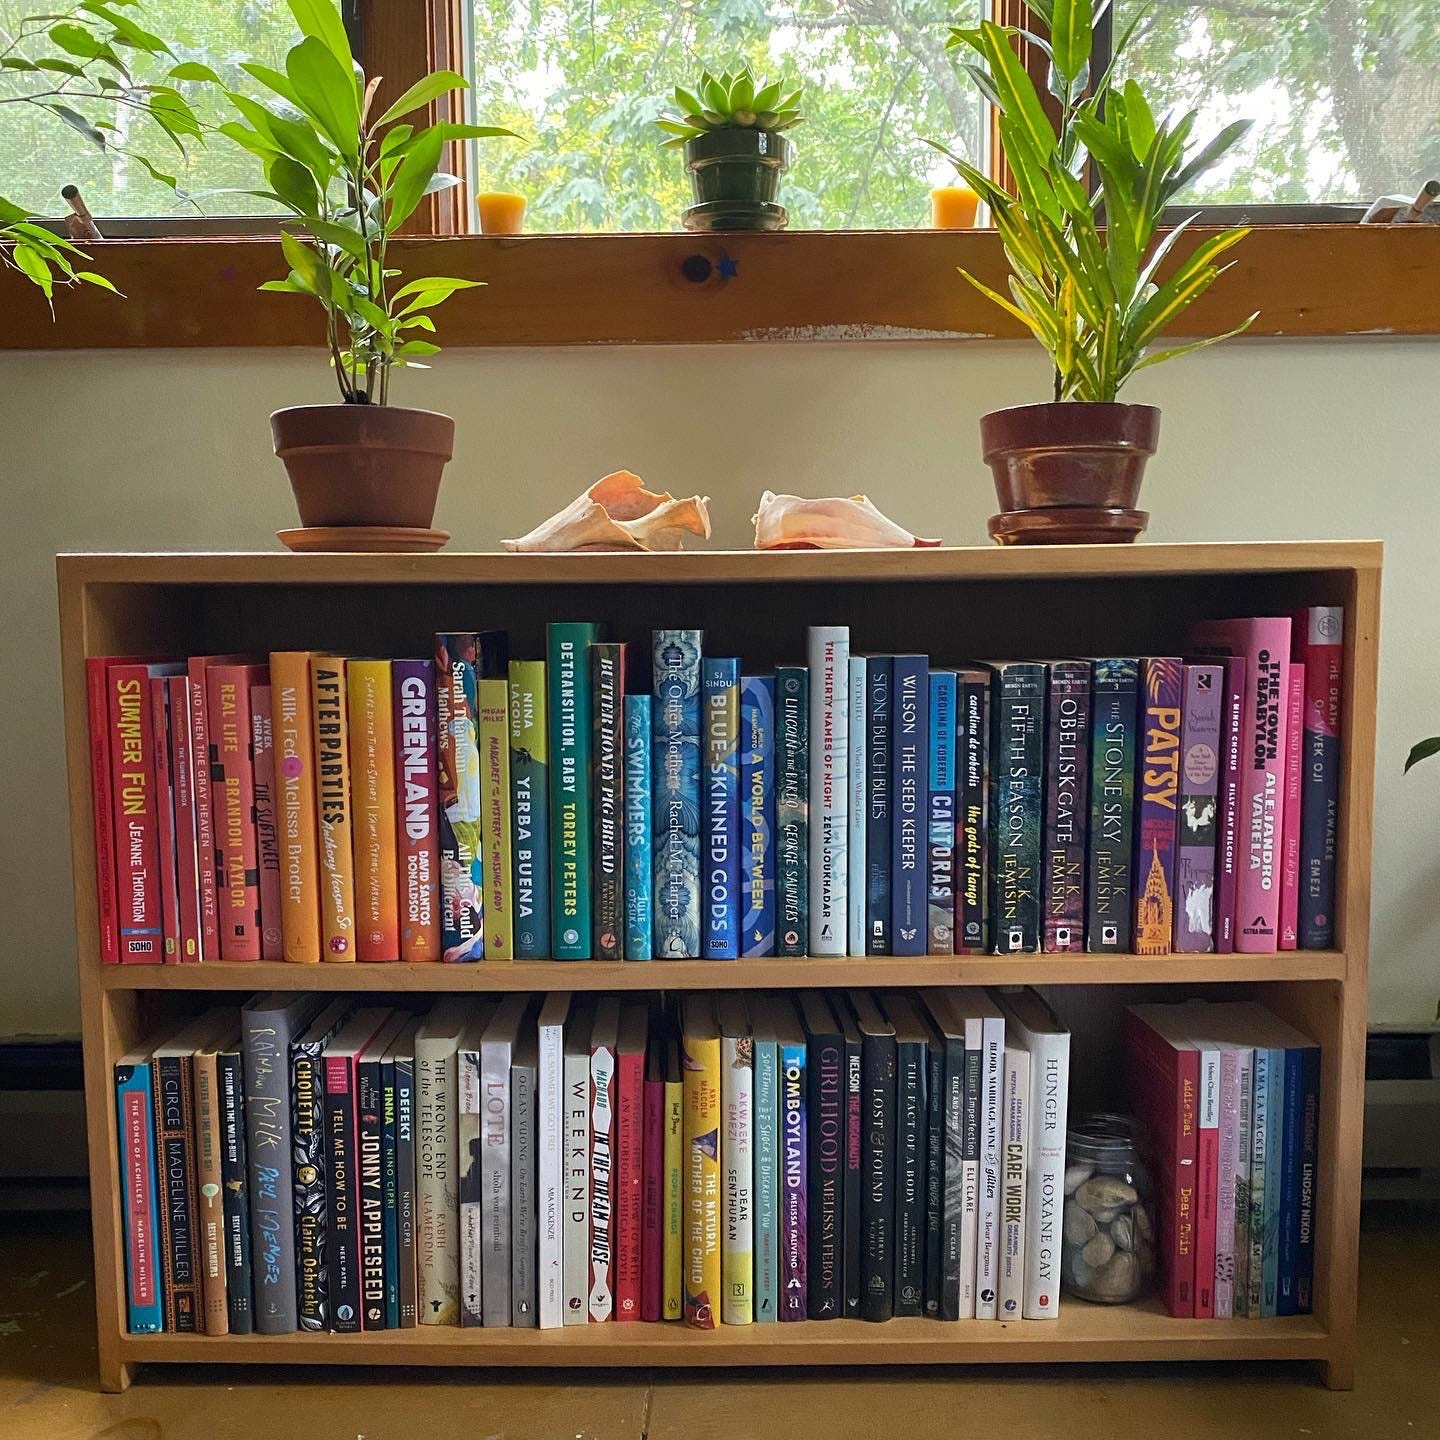  A low wooden bookshelf under a window full of books arranged in rainbow order. Several plants sit on top.